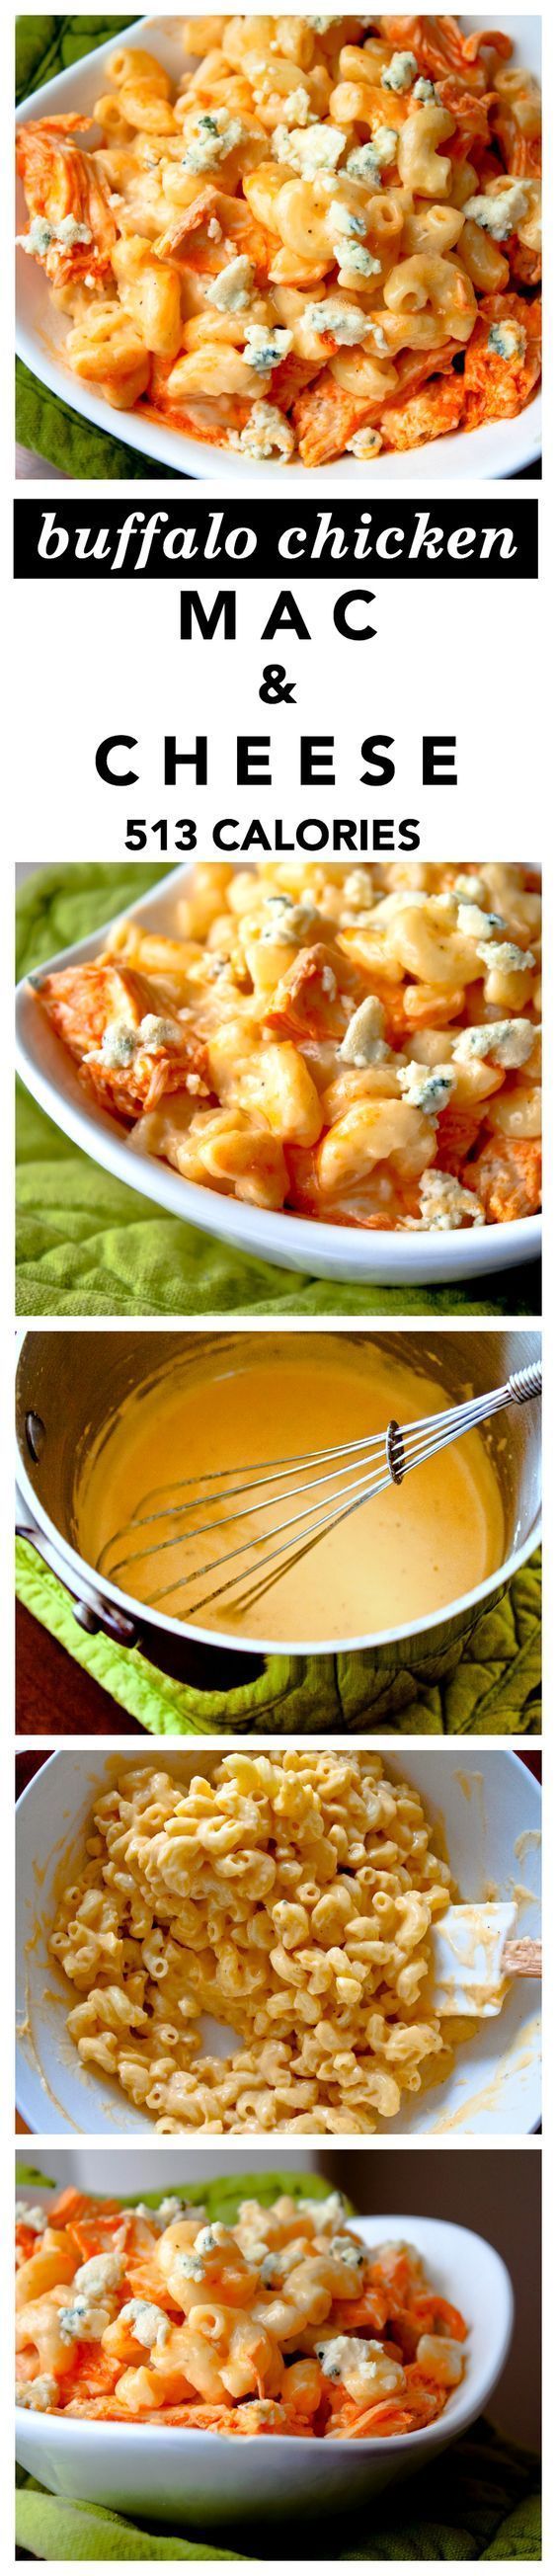 Creamy Buffalo Chicken Macaroni and Cheese Recipe! This “comfort in a bowl” mac and cheese has shredded ch